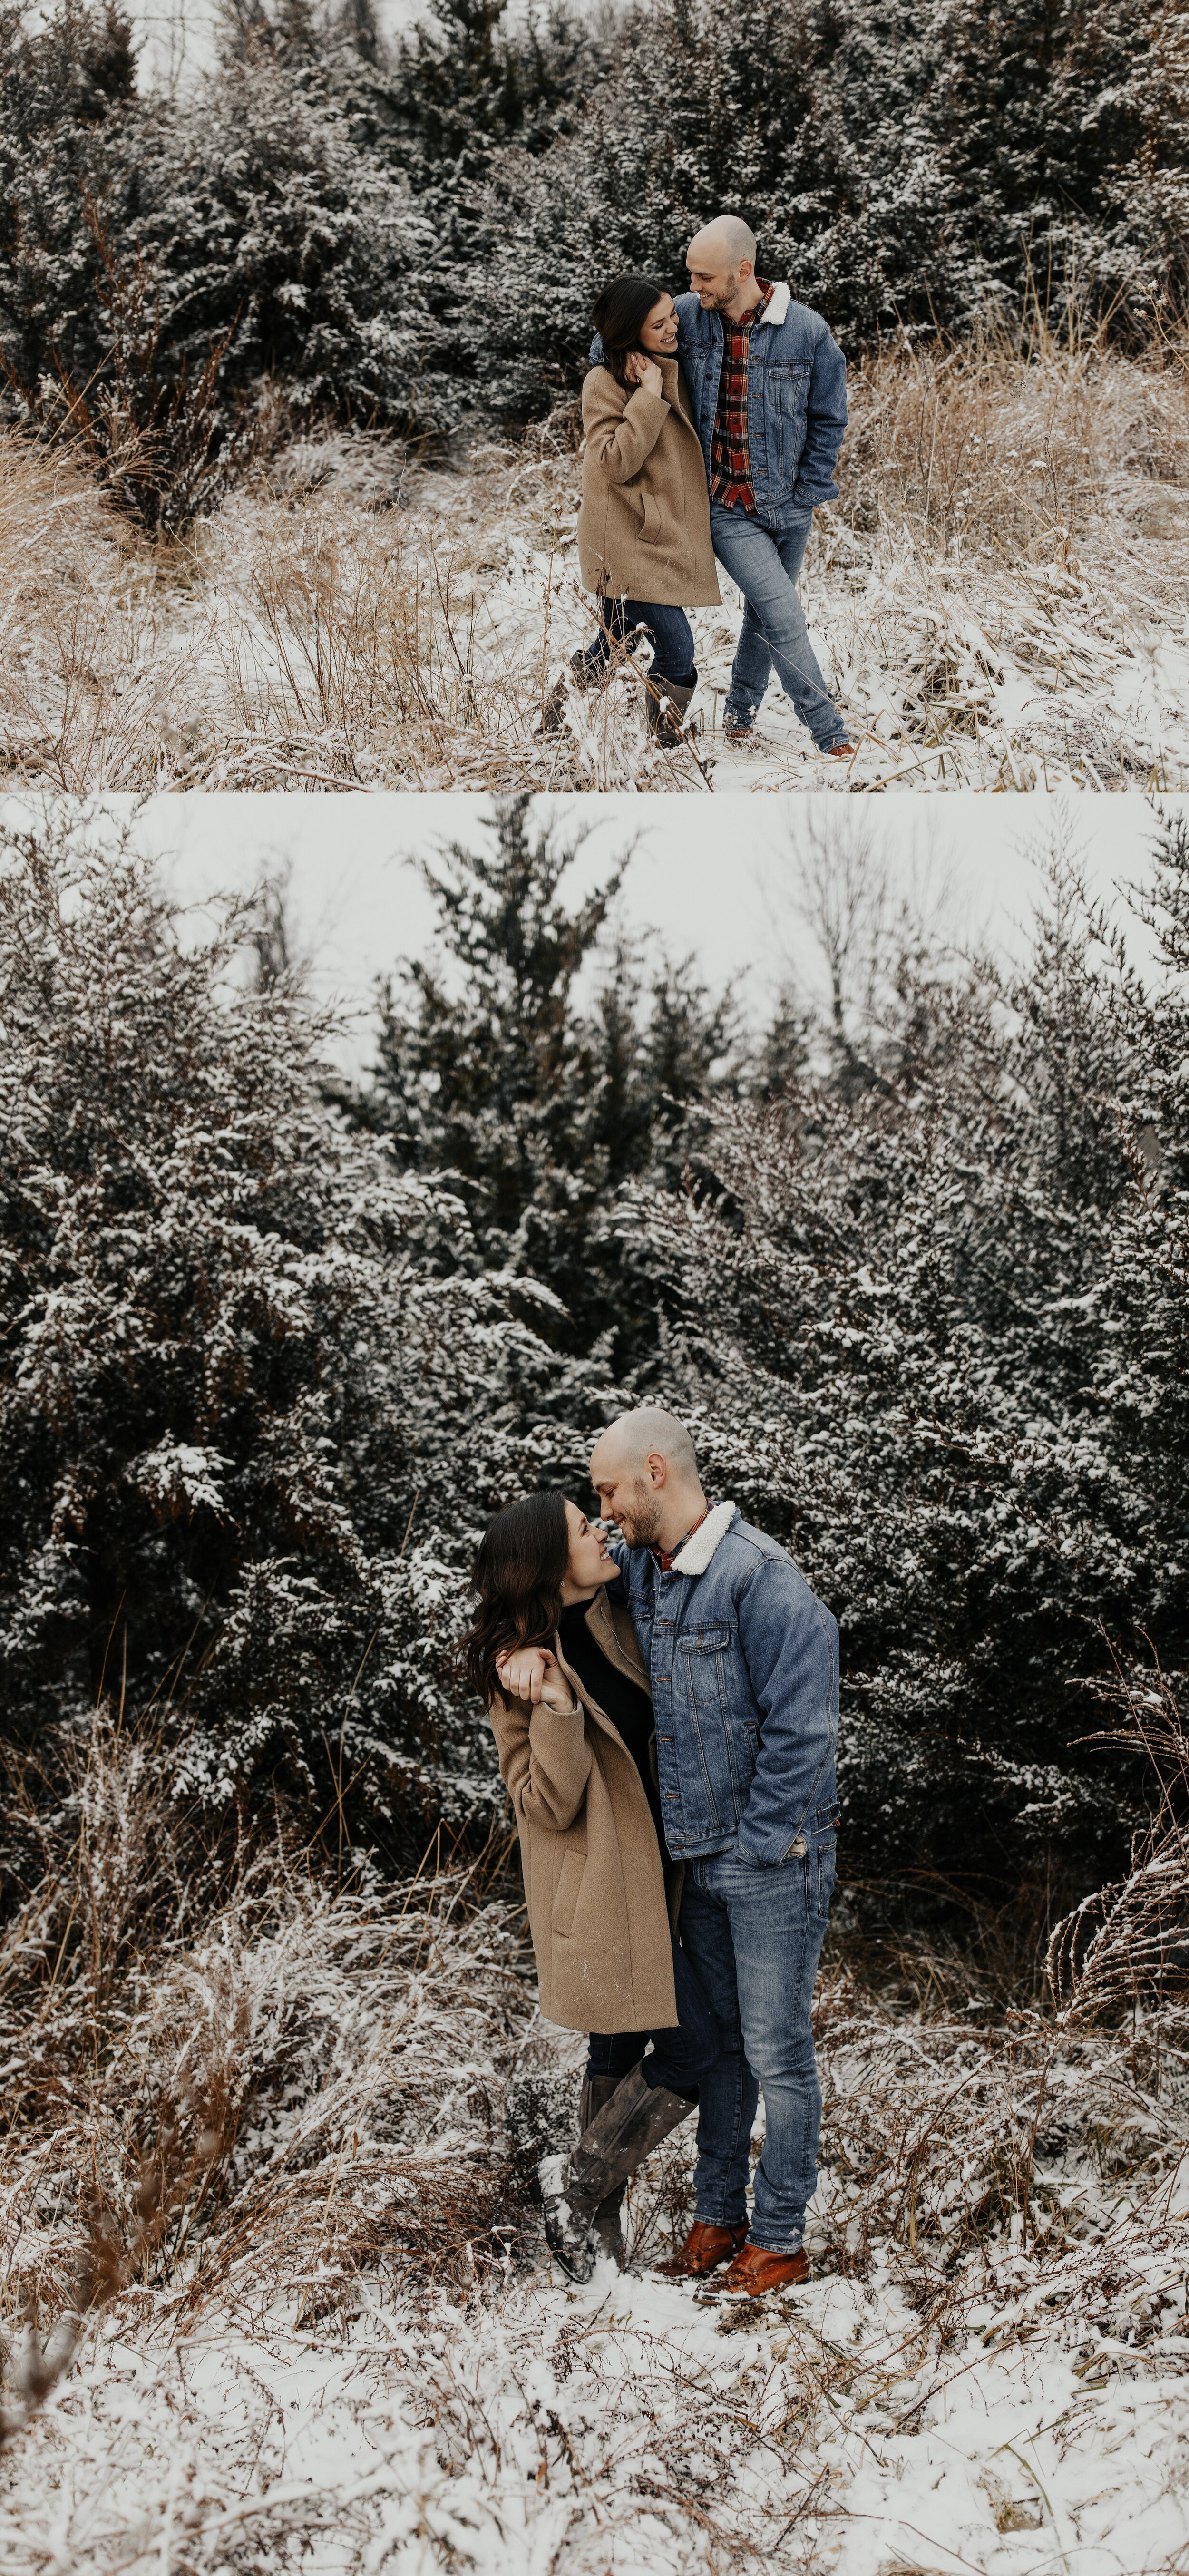 jessika-christine-photography-outdoor-engagement-couples-snow-adventurous-session (10).jpg